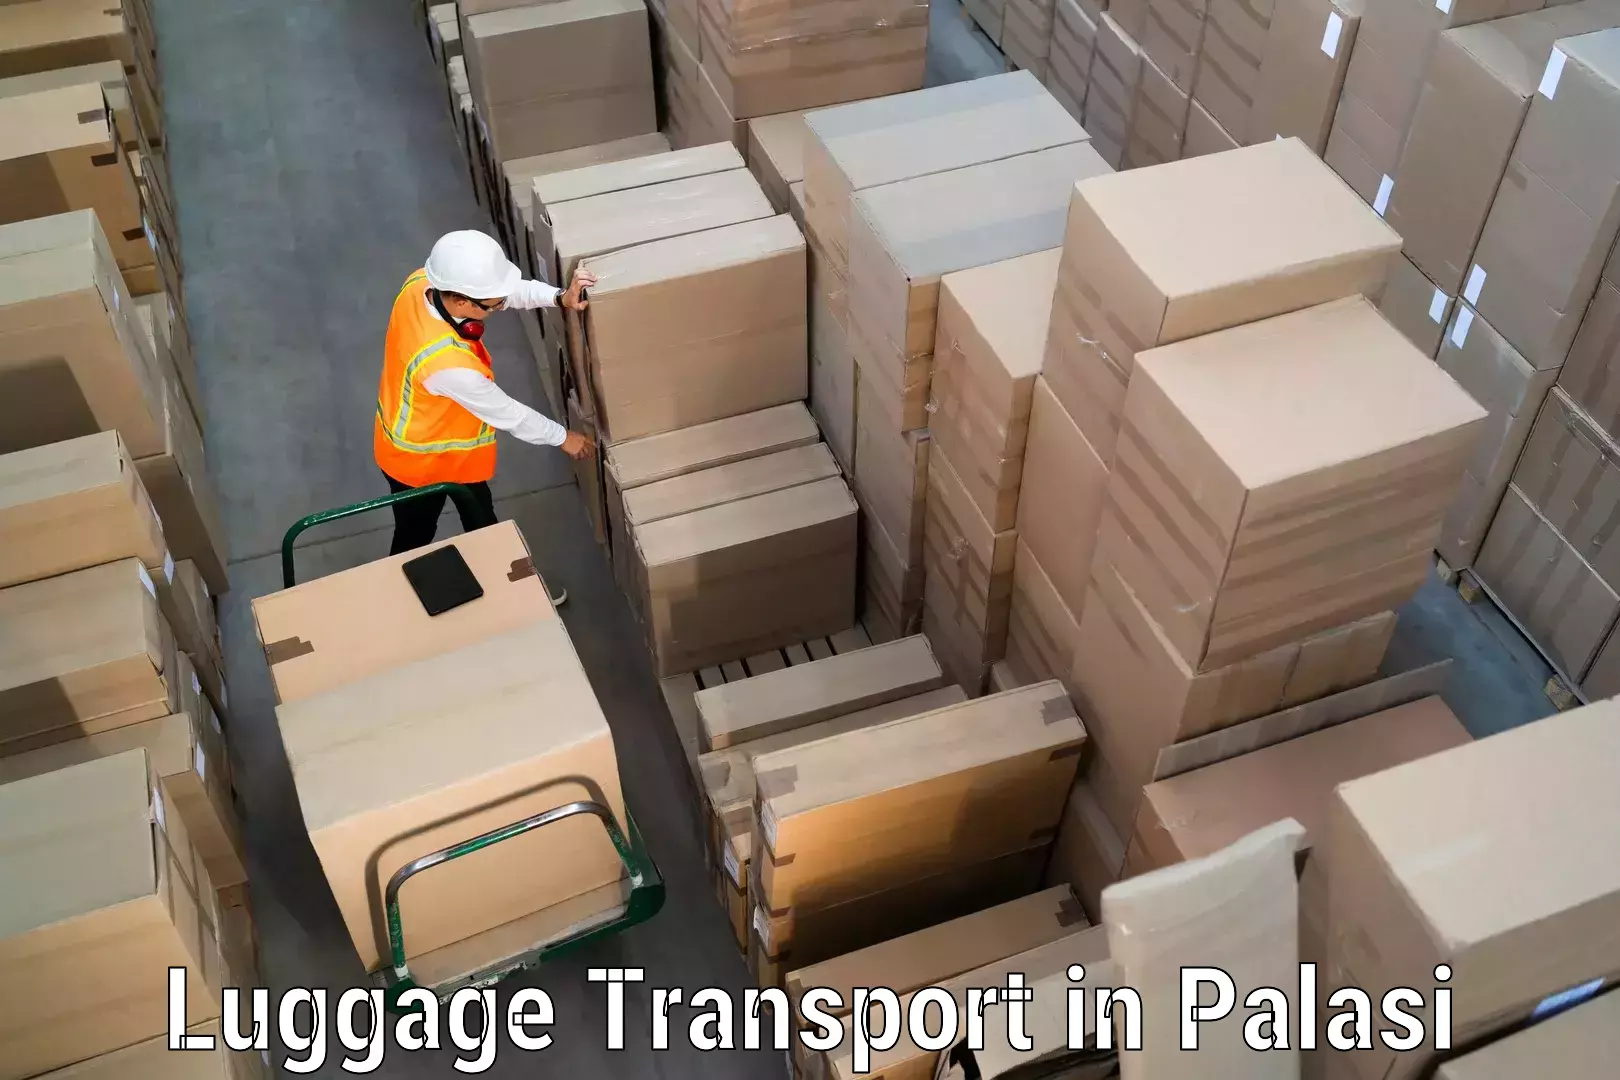 Baggage relocation service in Palasi